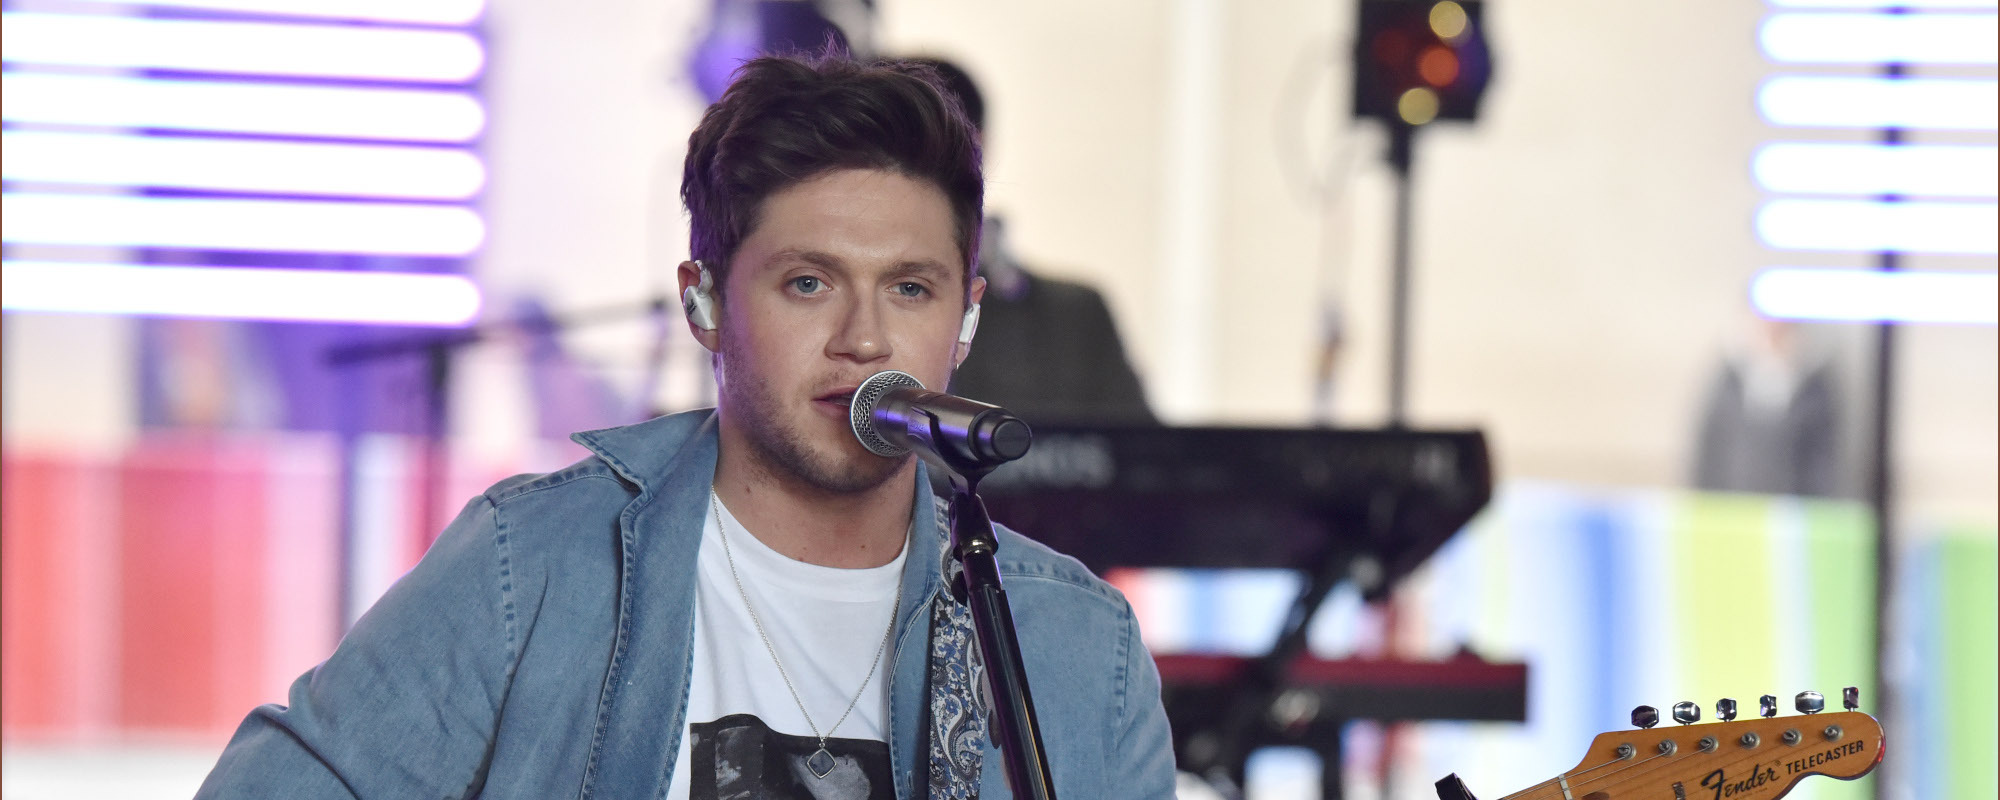 New Song Saturday! Hear New Tracks from Niall Horan, The Weeknd, First Aid Kit, Coolio and More